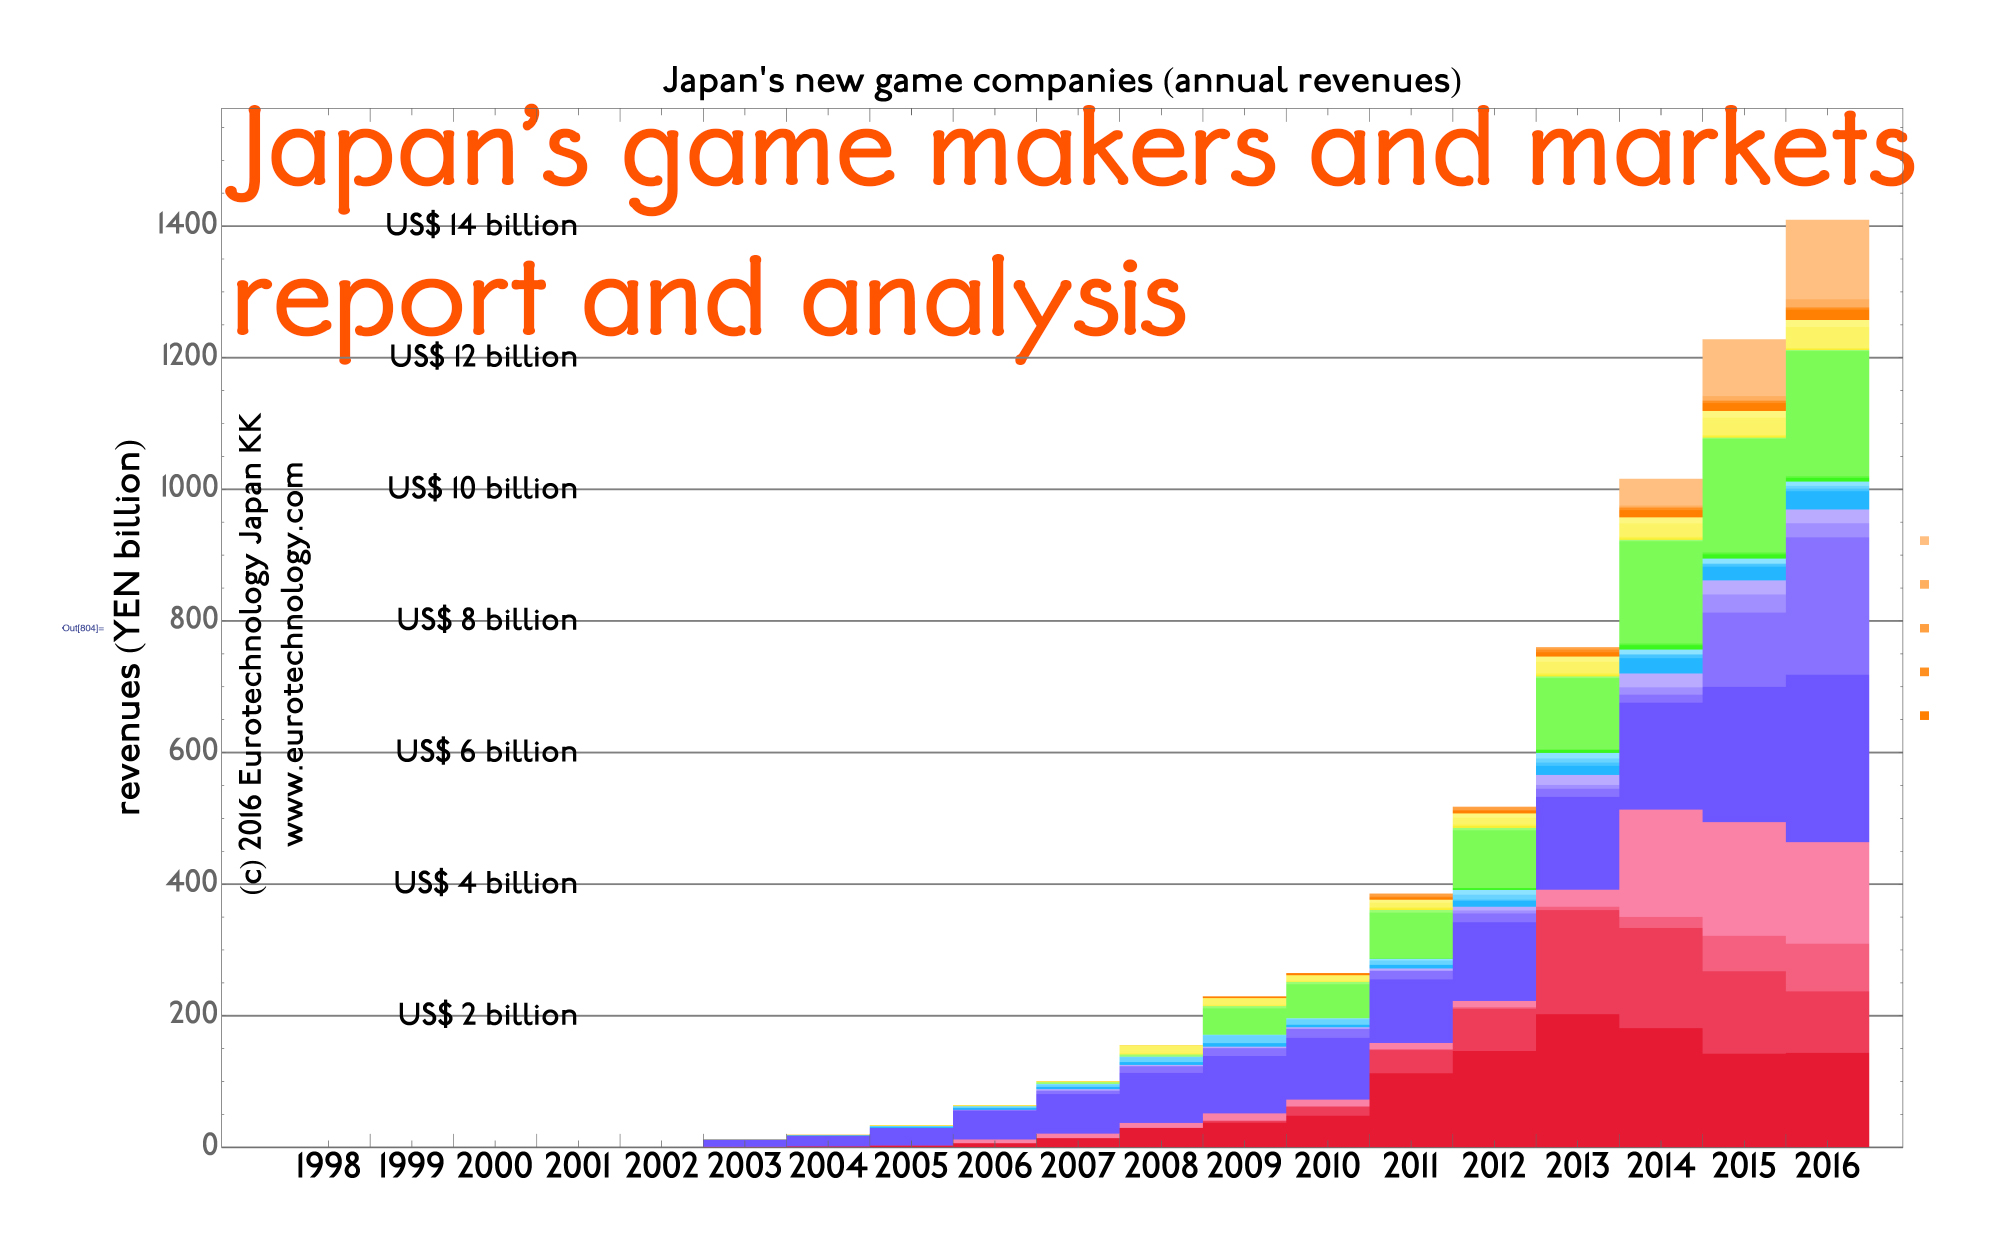 Japan's game makers and markets